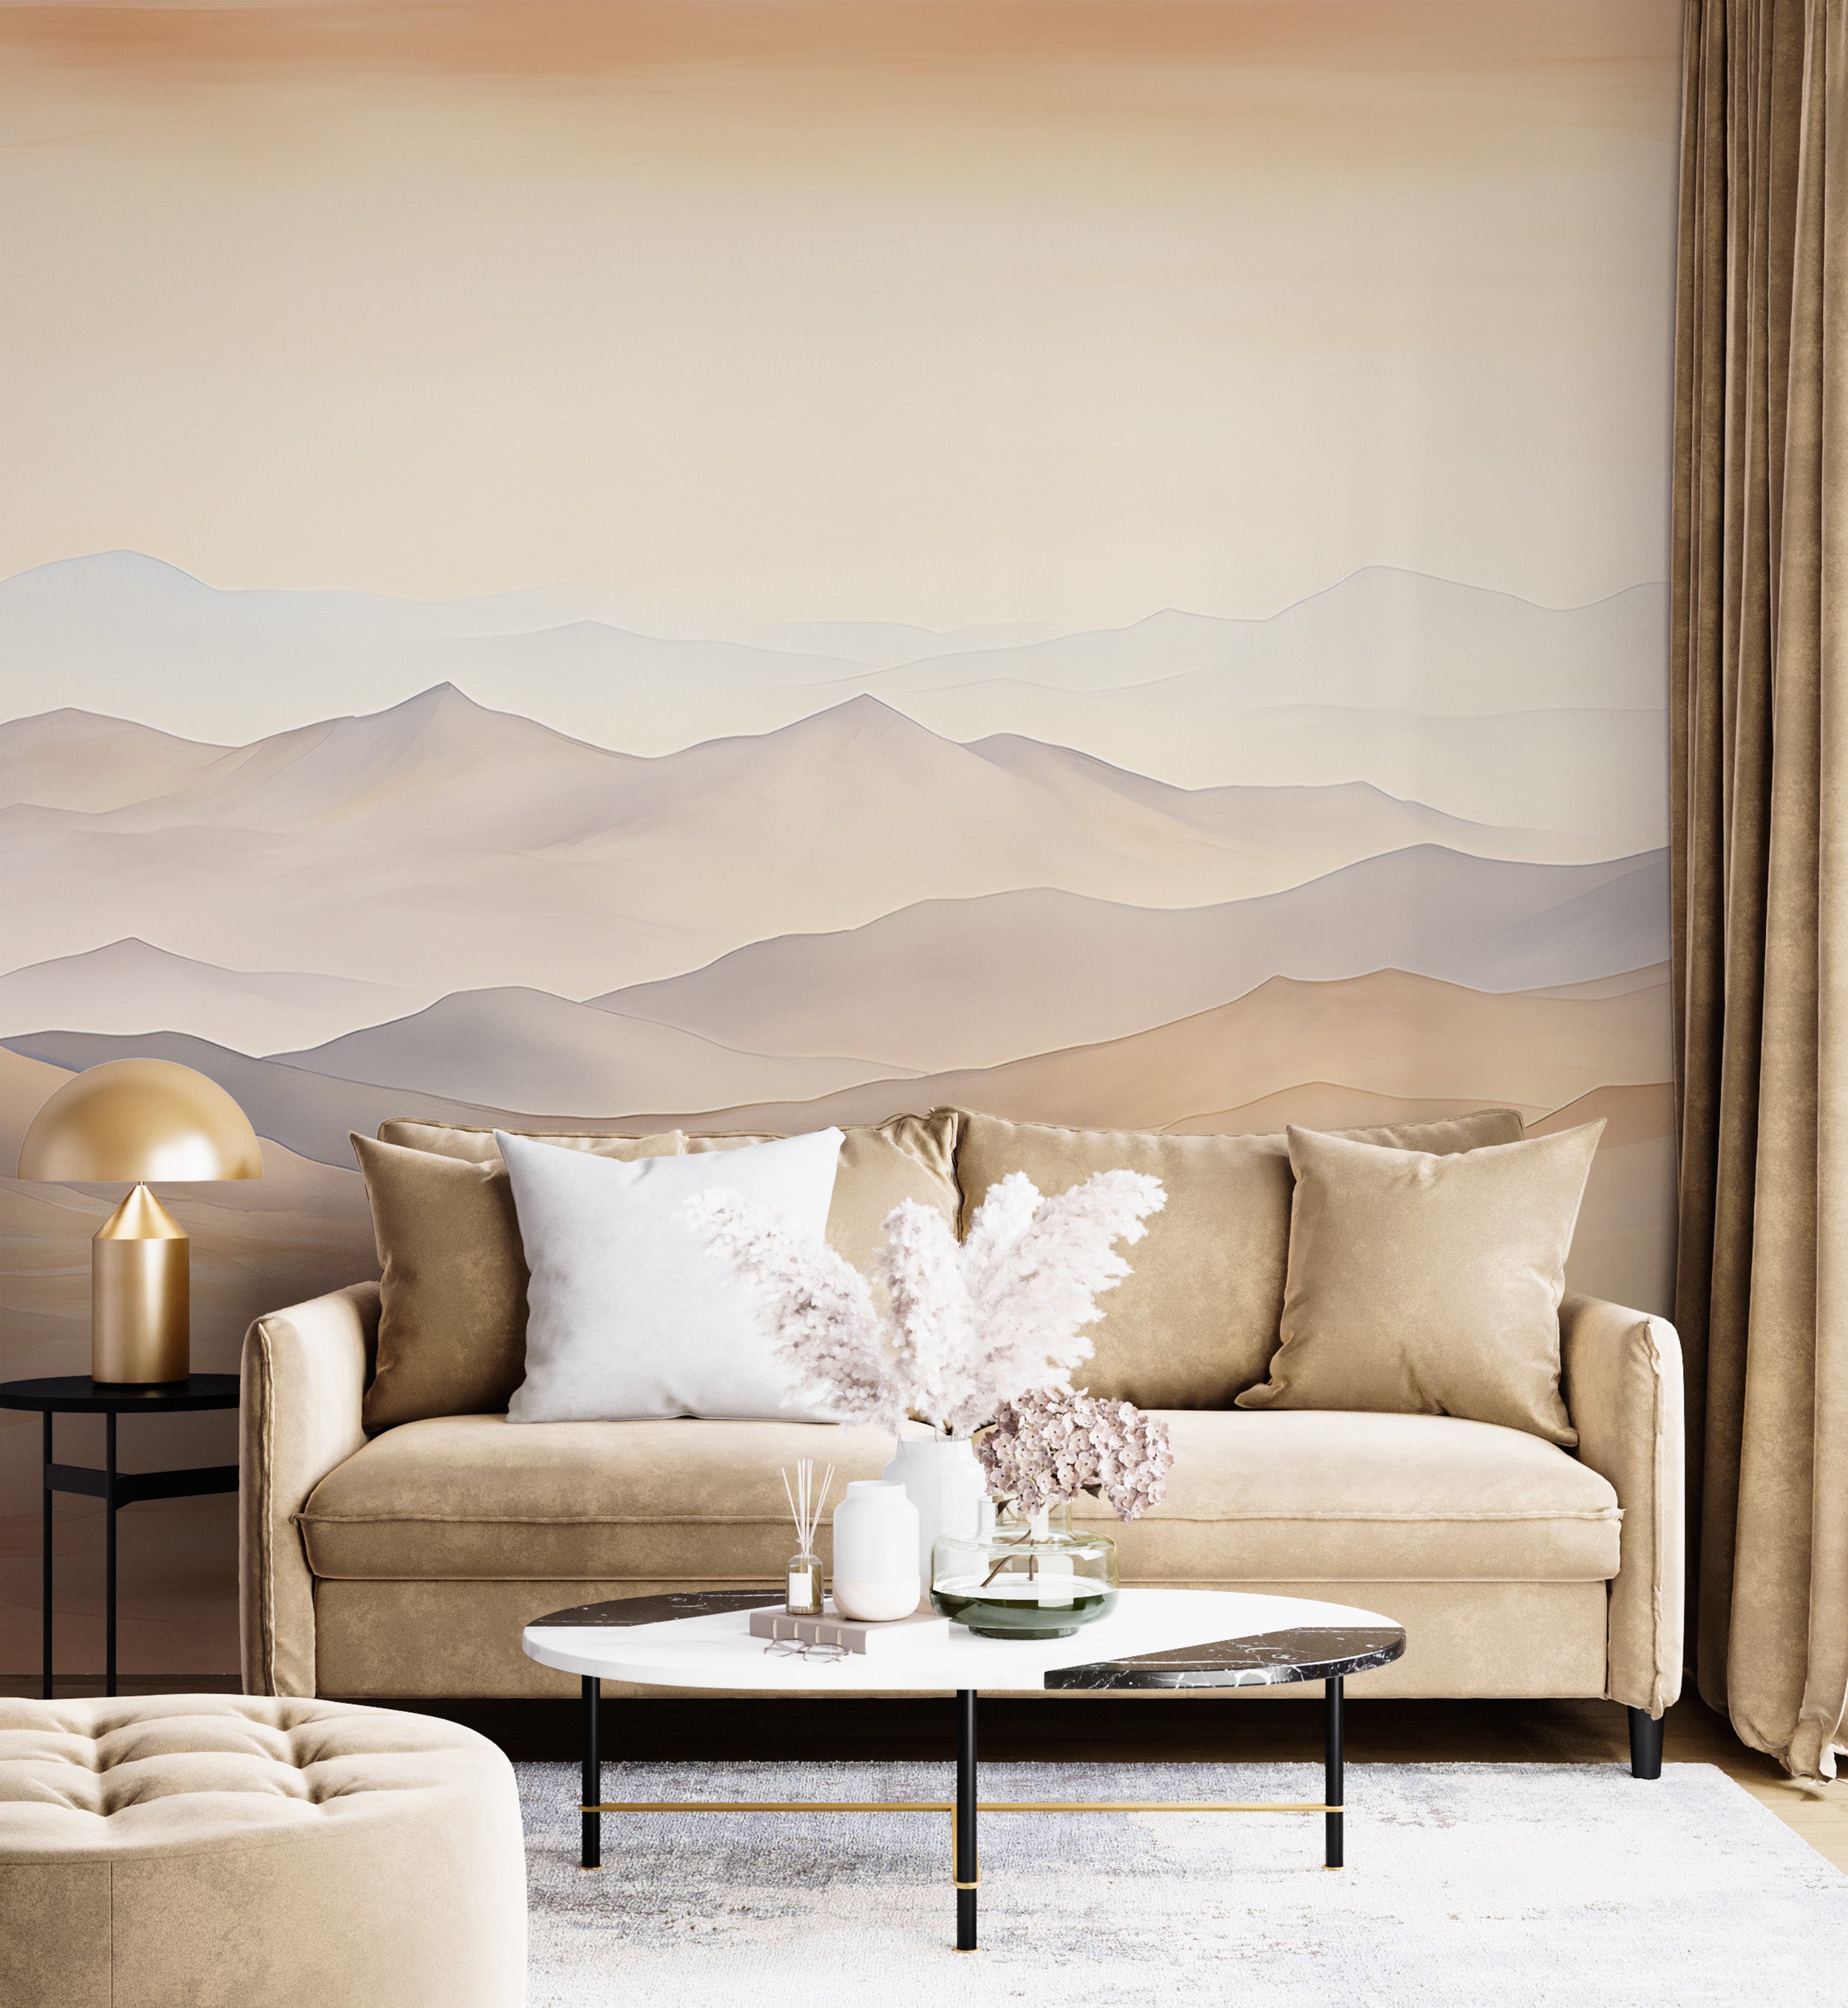 Transform Your Room with Sand Dunes Watercolor Mural